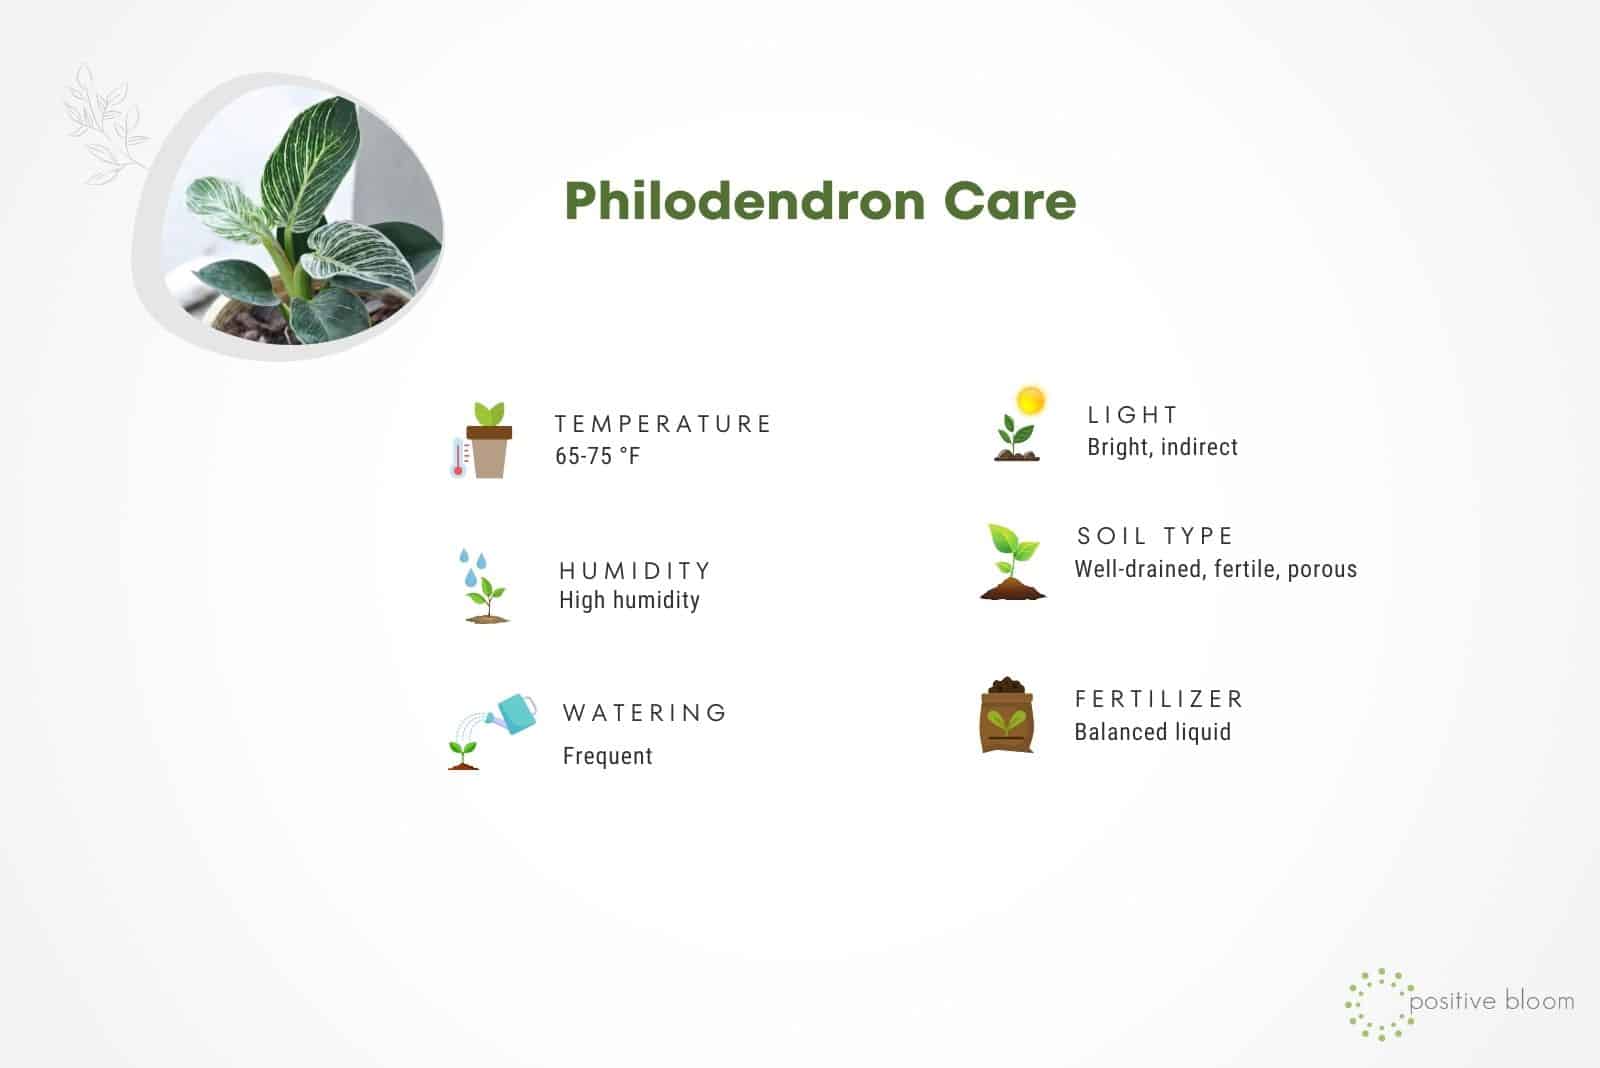 Philodendron Care illustration